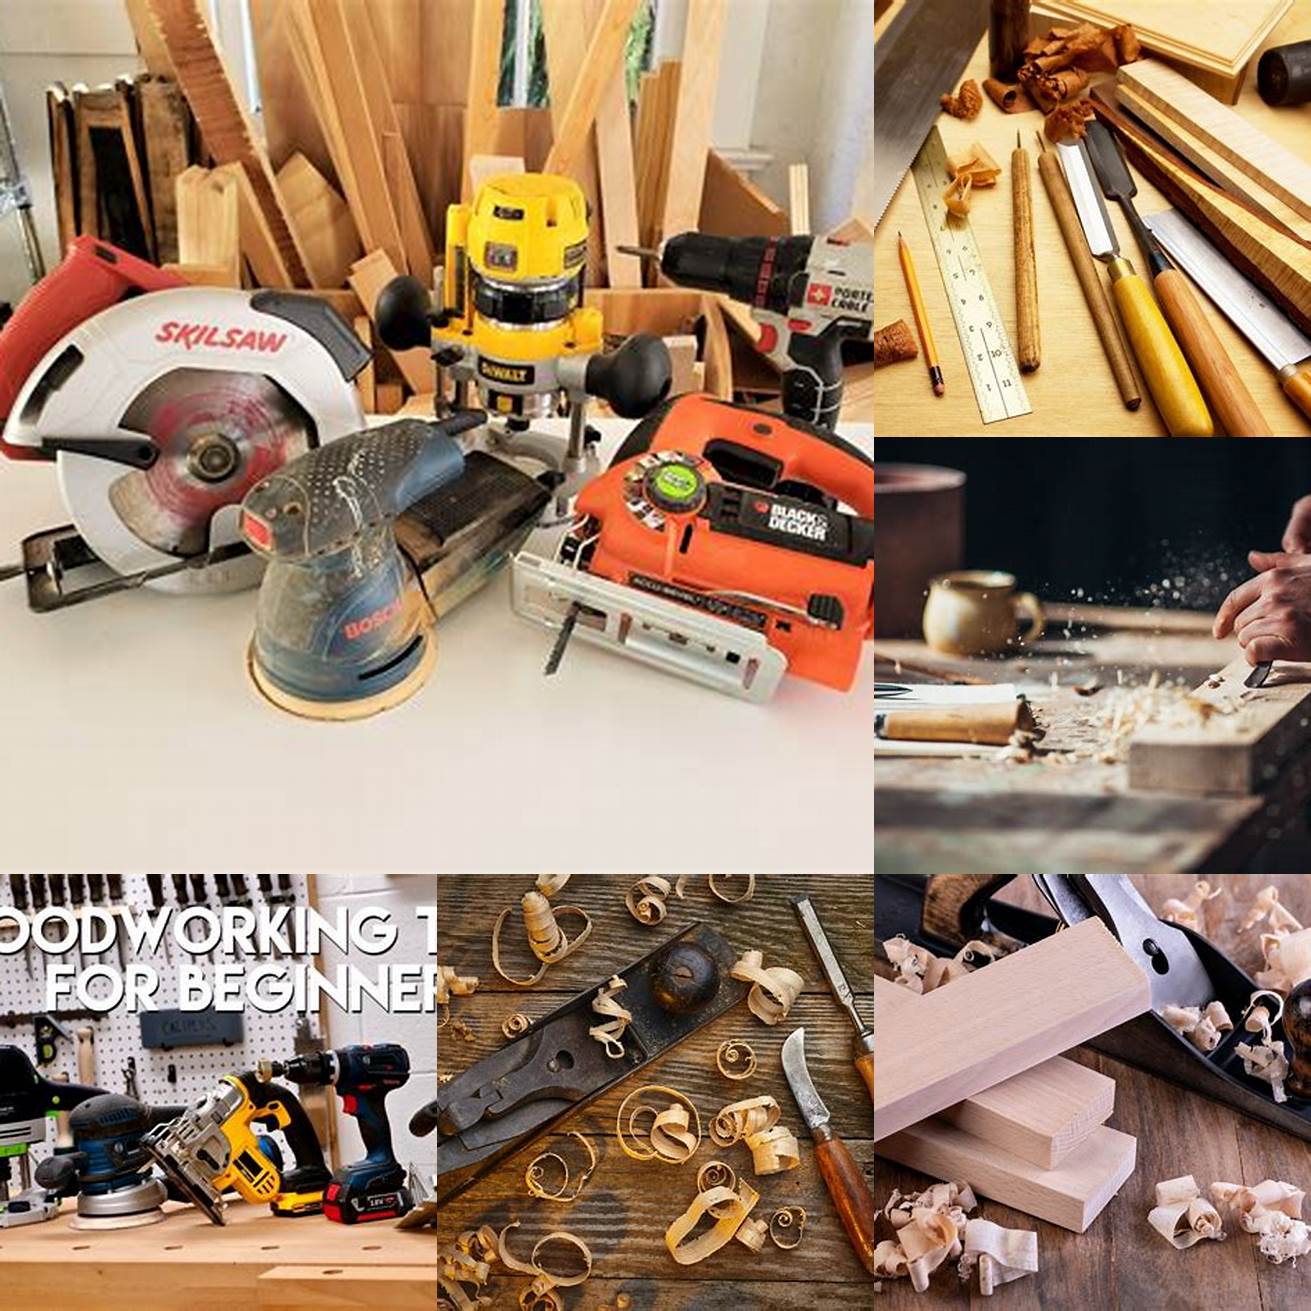 Woodworking tools and materials